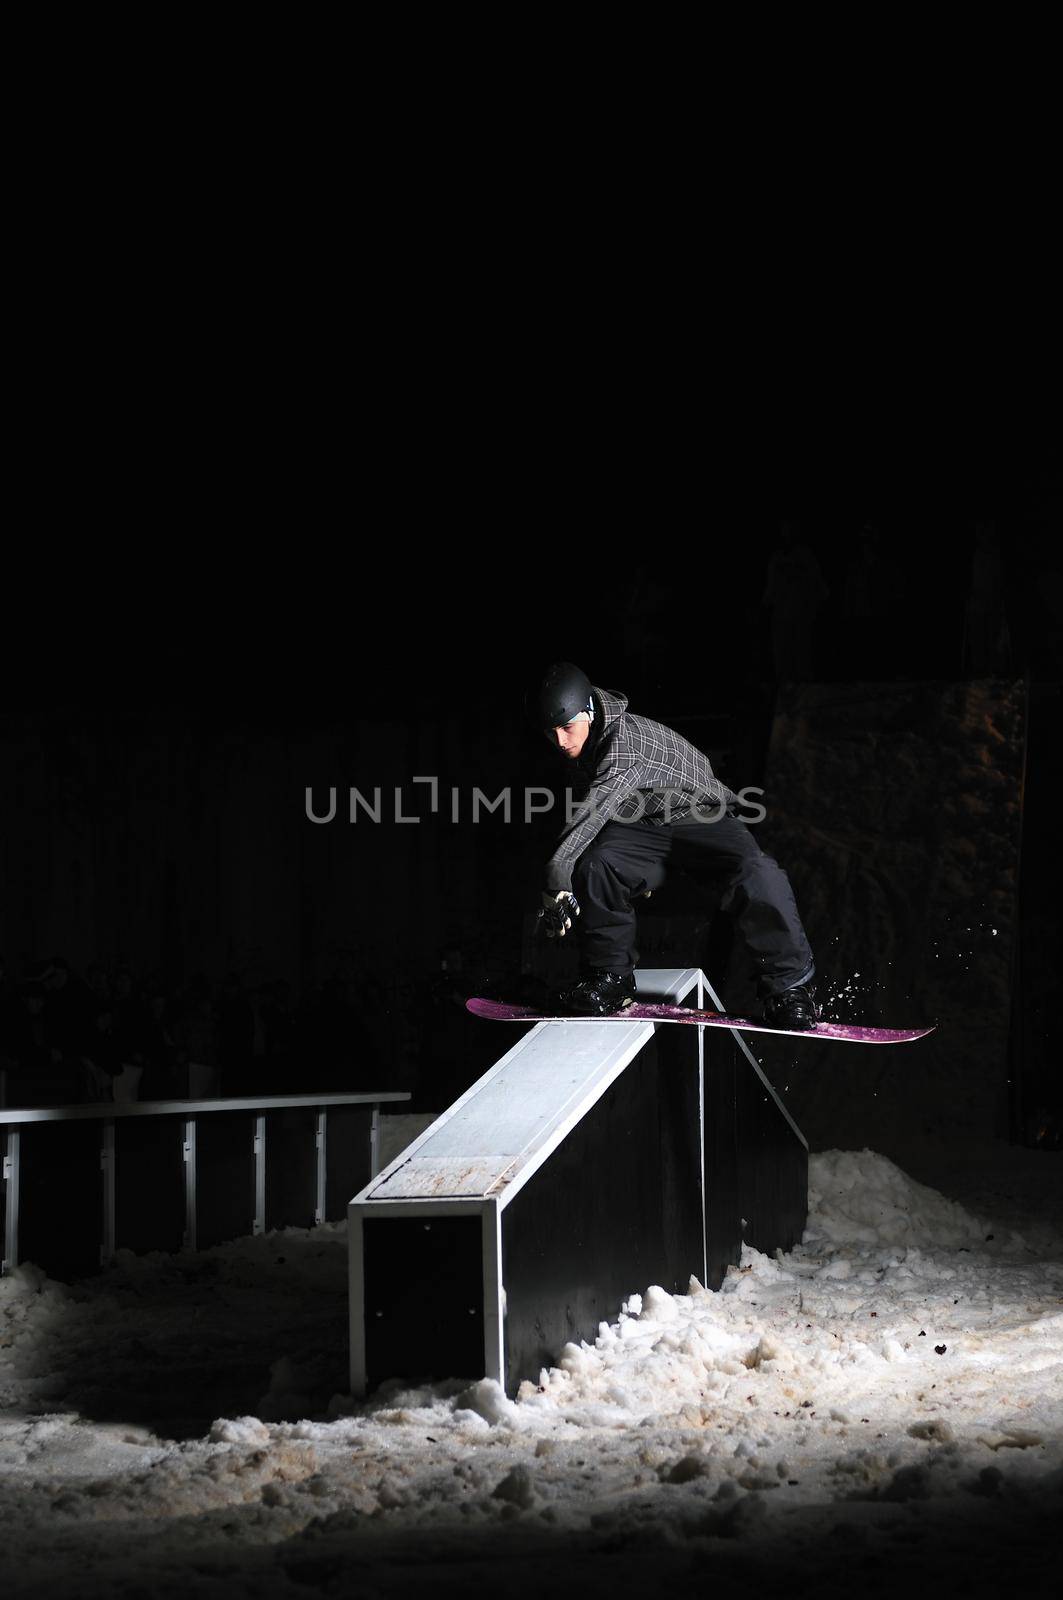 freestyle snowboarder jump in air at night by dotshock